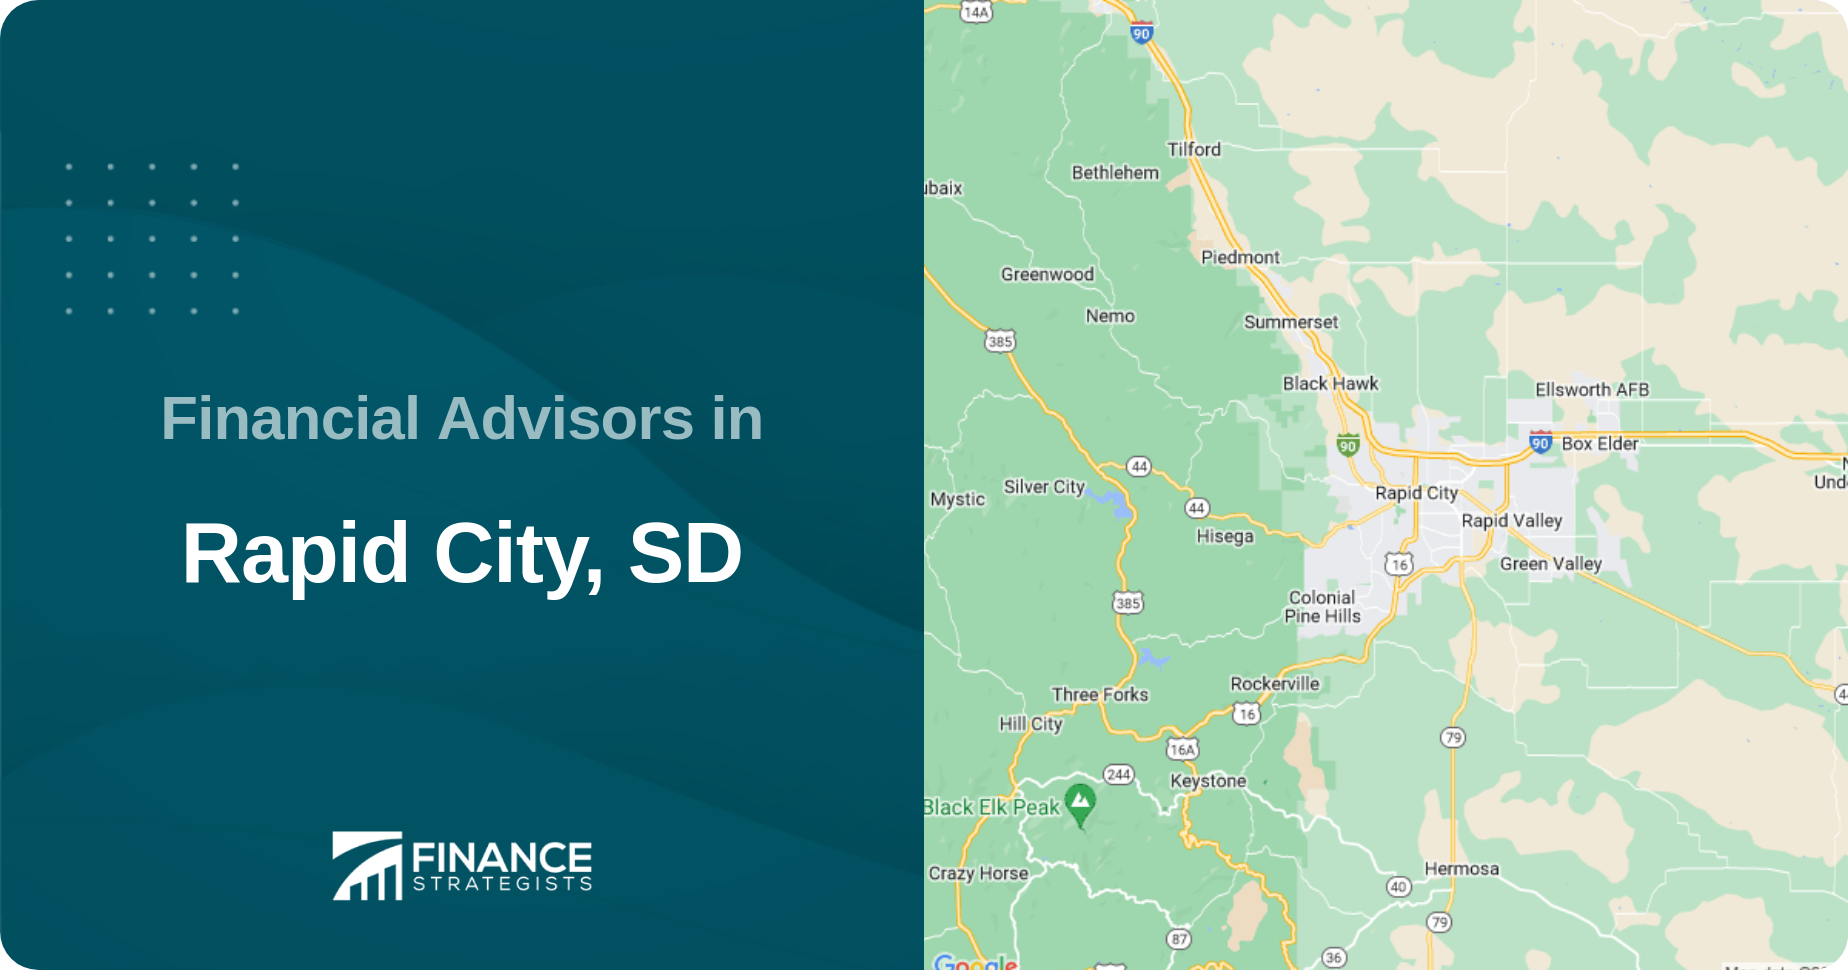 Financial Advisors in Rapid City, SD